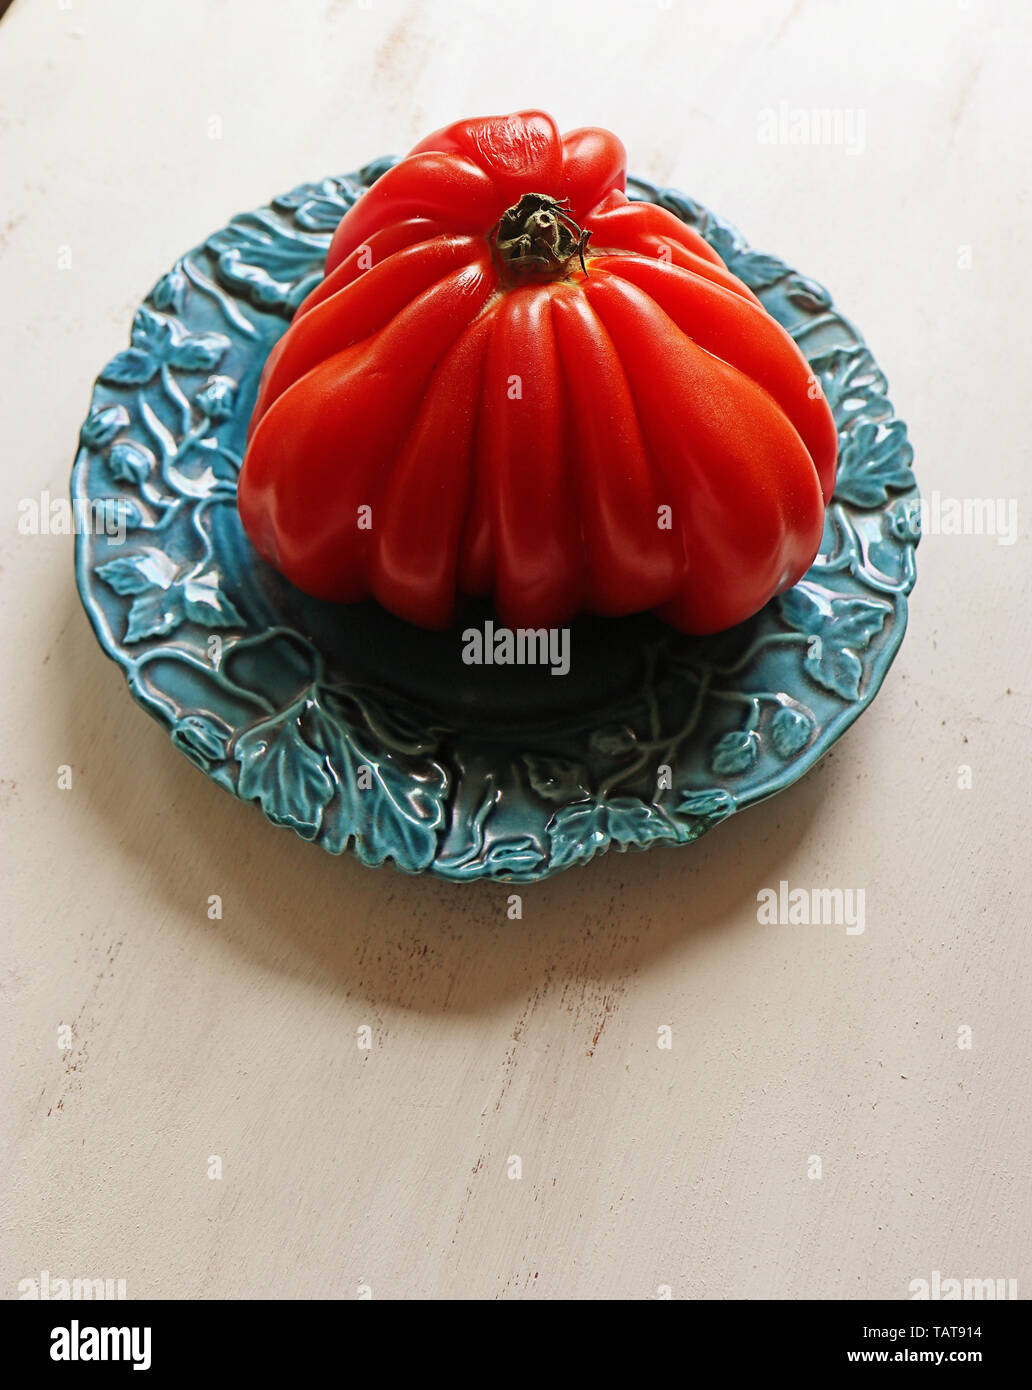 Giant beef heart tomato on a blue plate Stock Photo